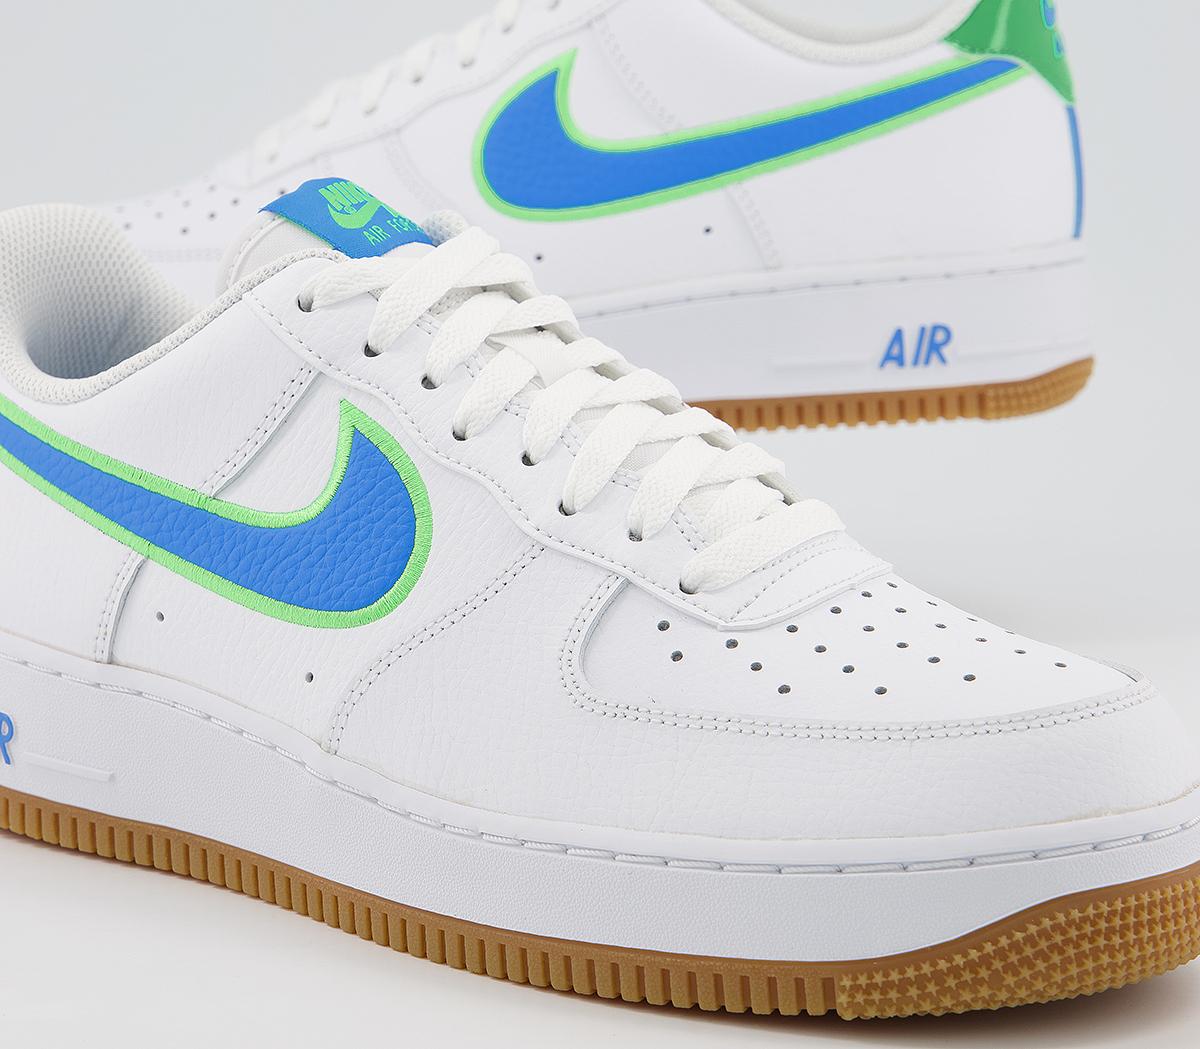 Nike Air Force 1 07 White Photo Blue Poison Green - His trainers